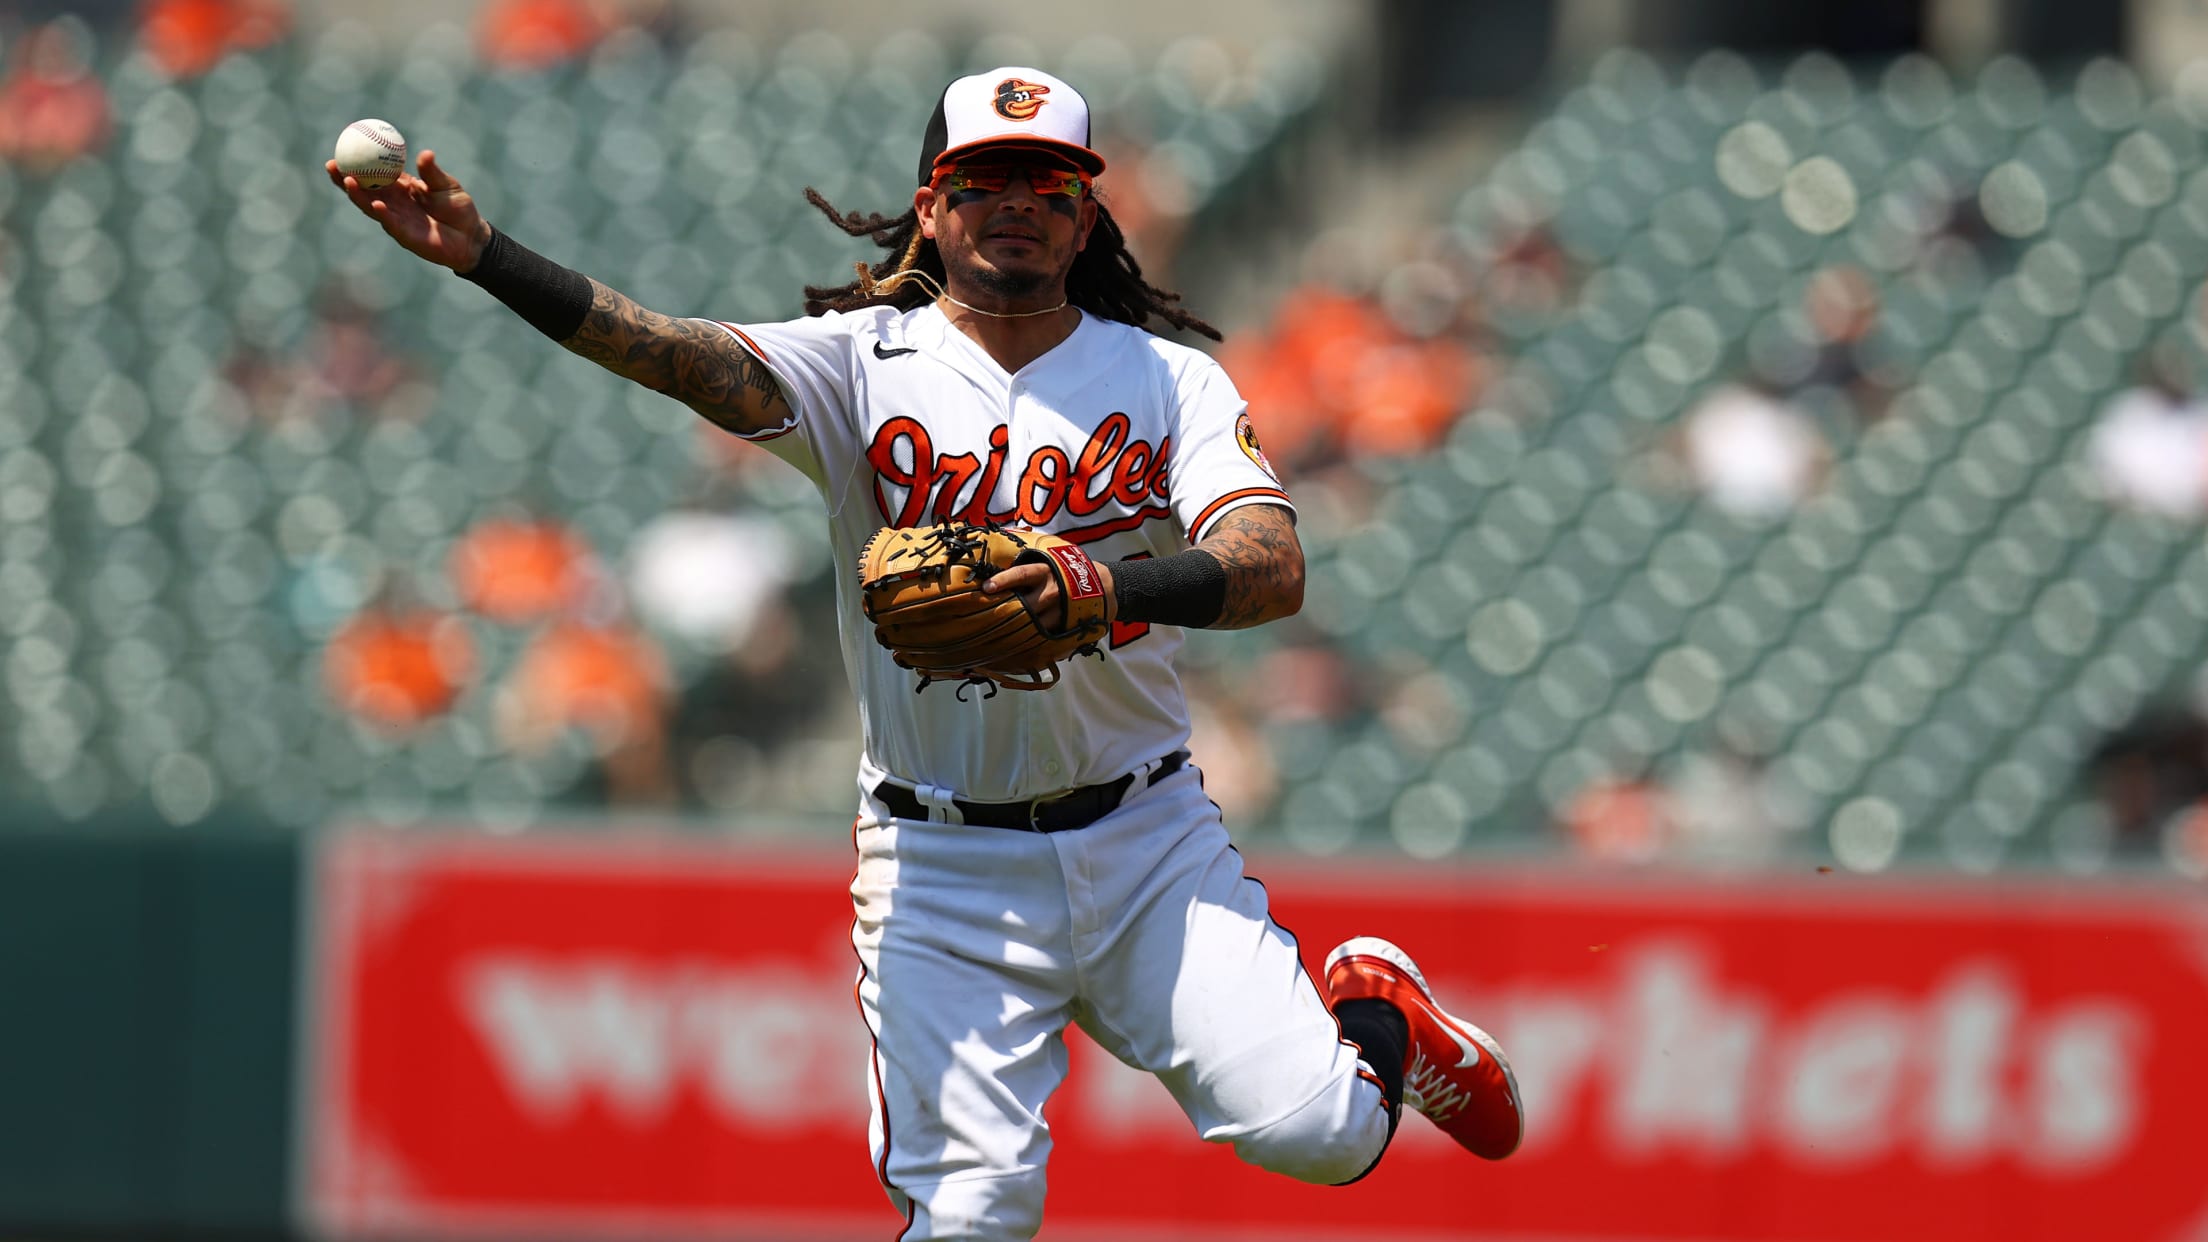 Phillies news: Freddy Galvis always thought he'd come home